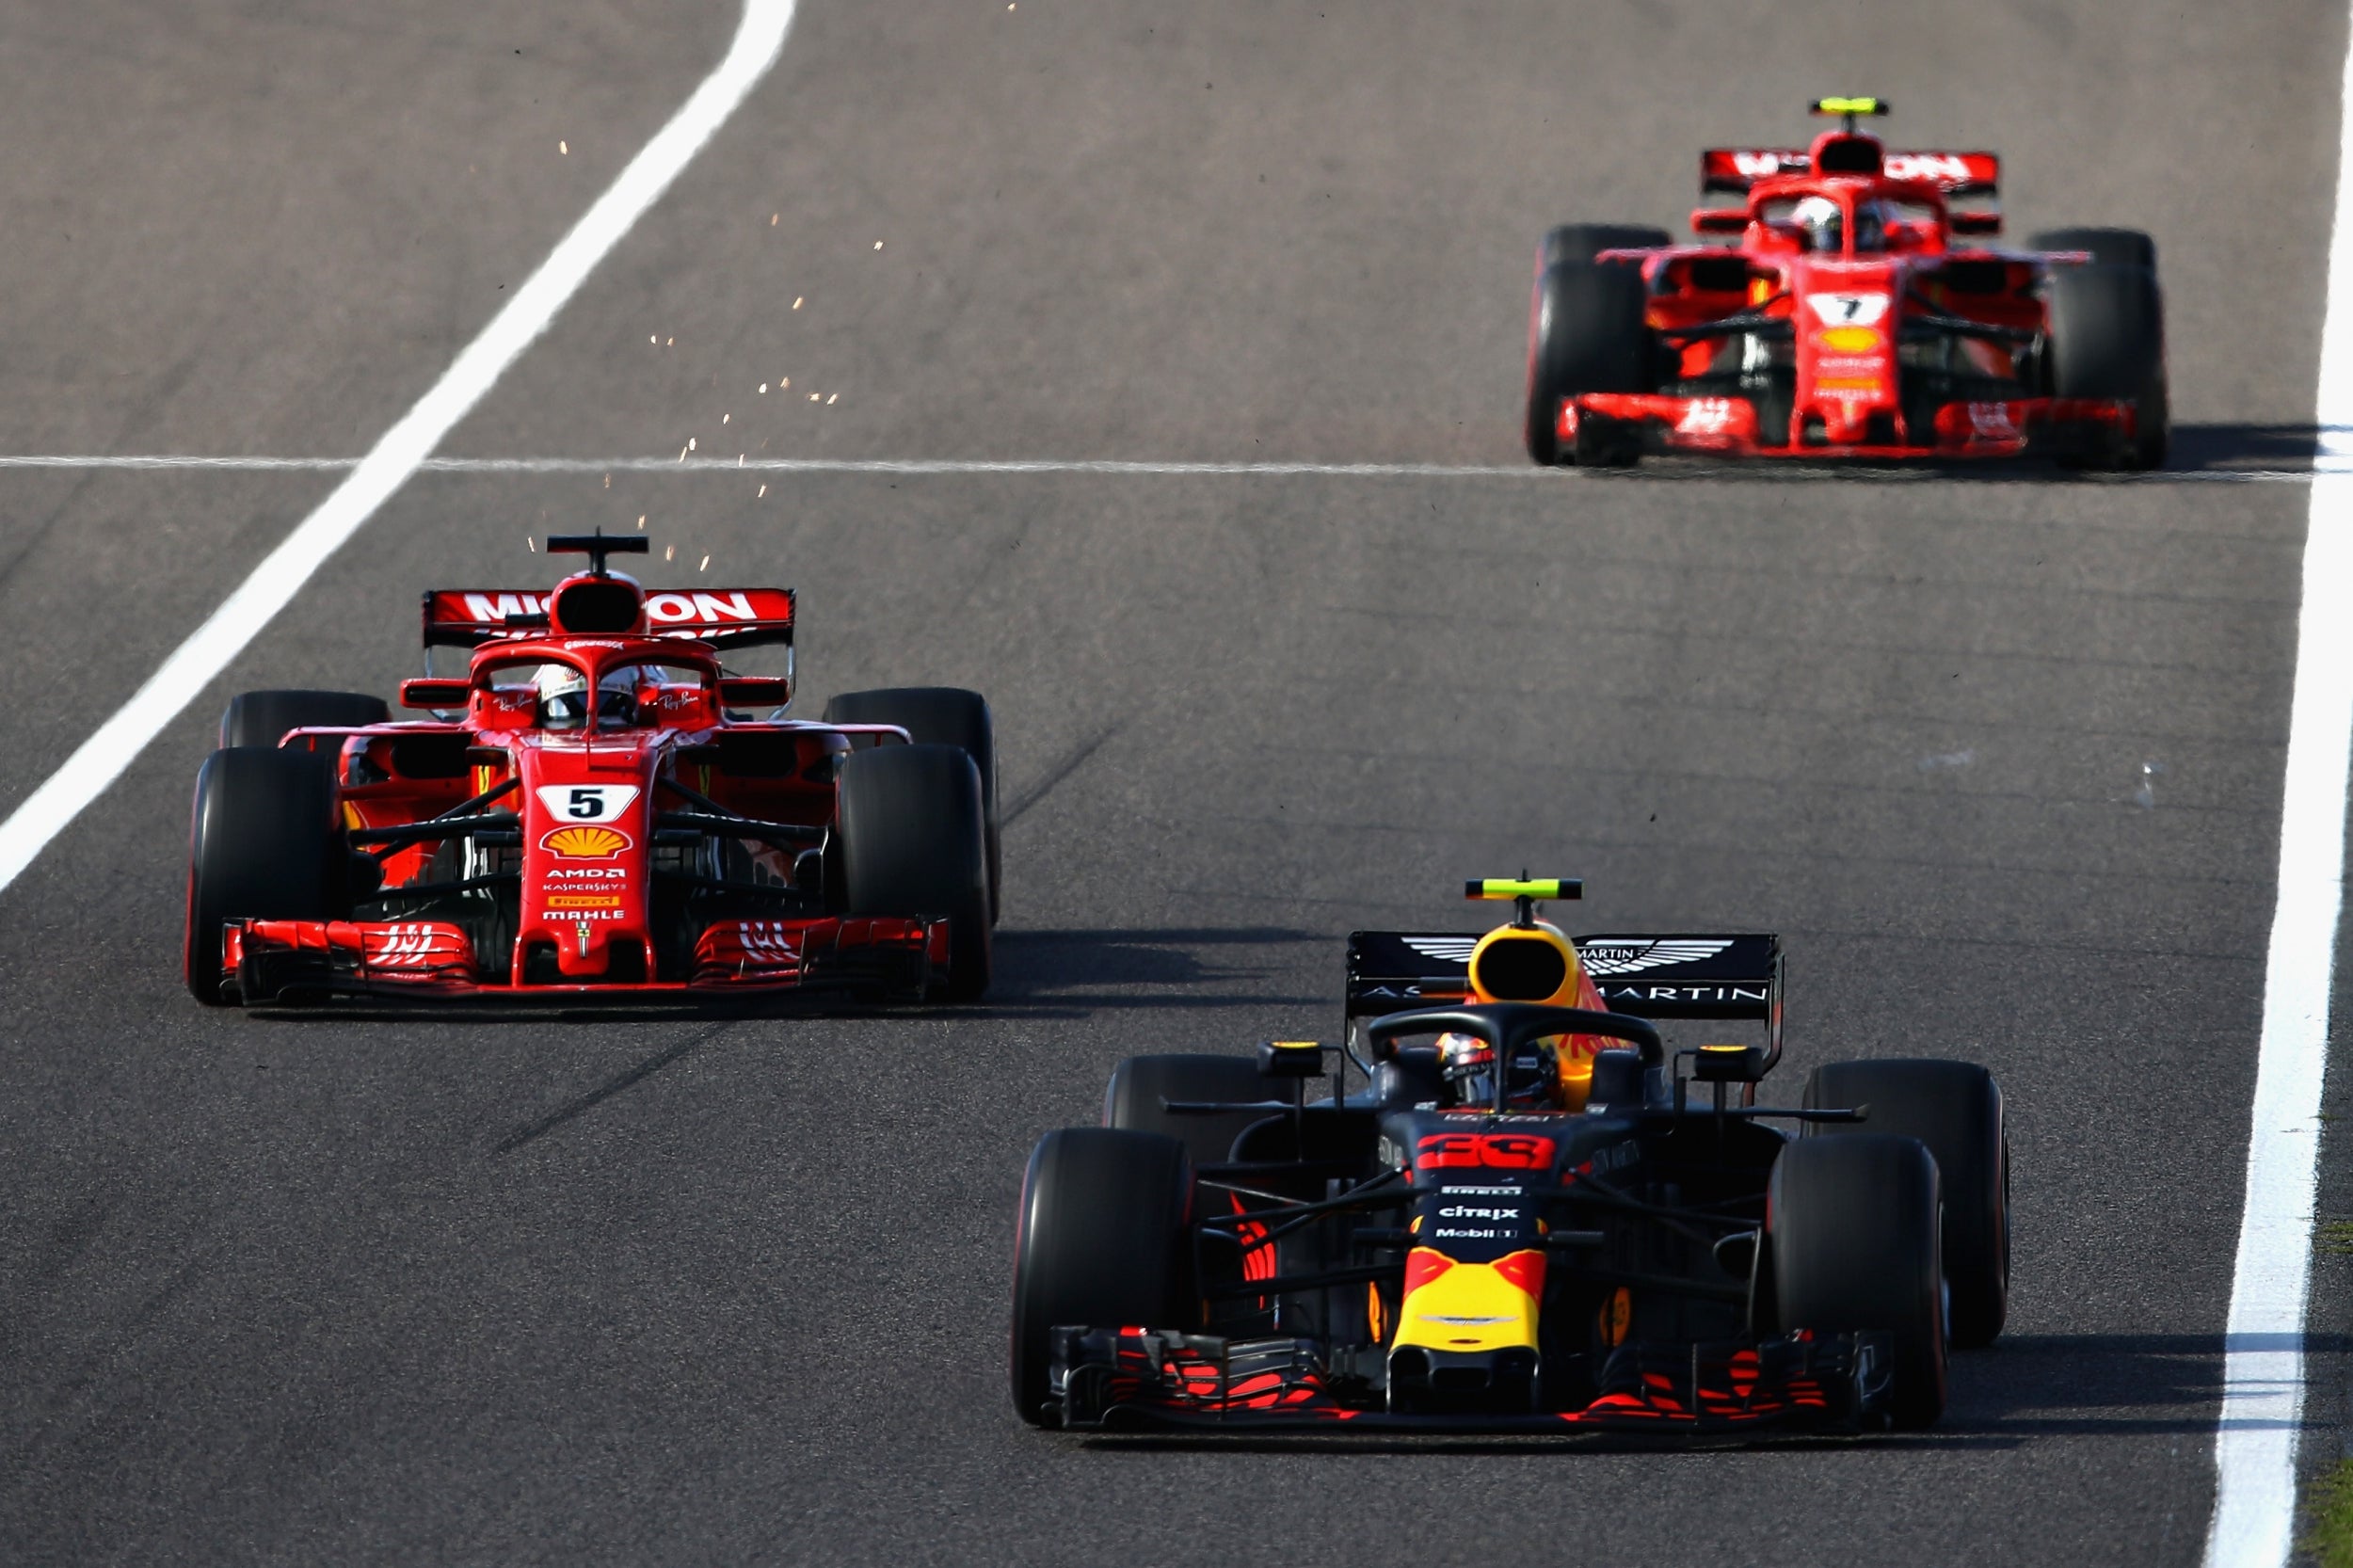 Vettel spun after contact with Verstappen at the Spoon Curve (Getty)